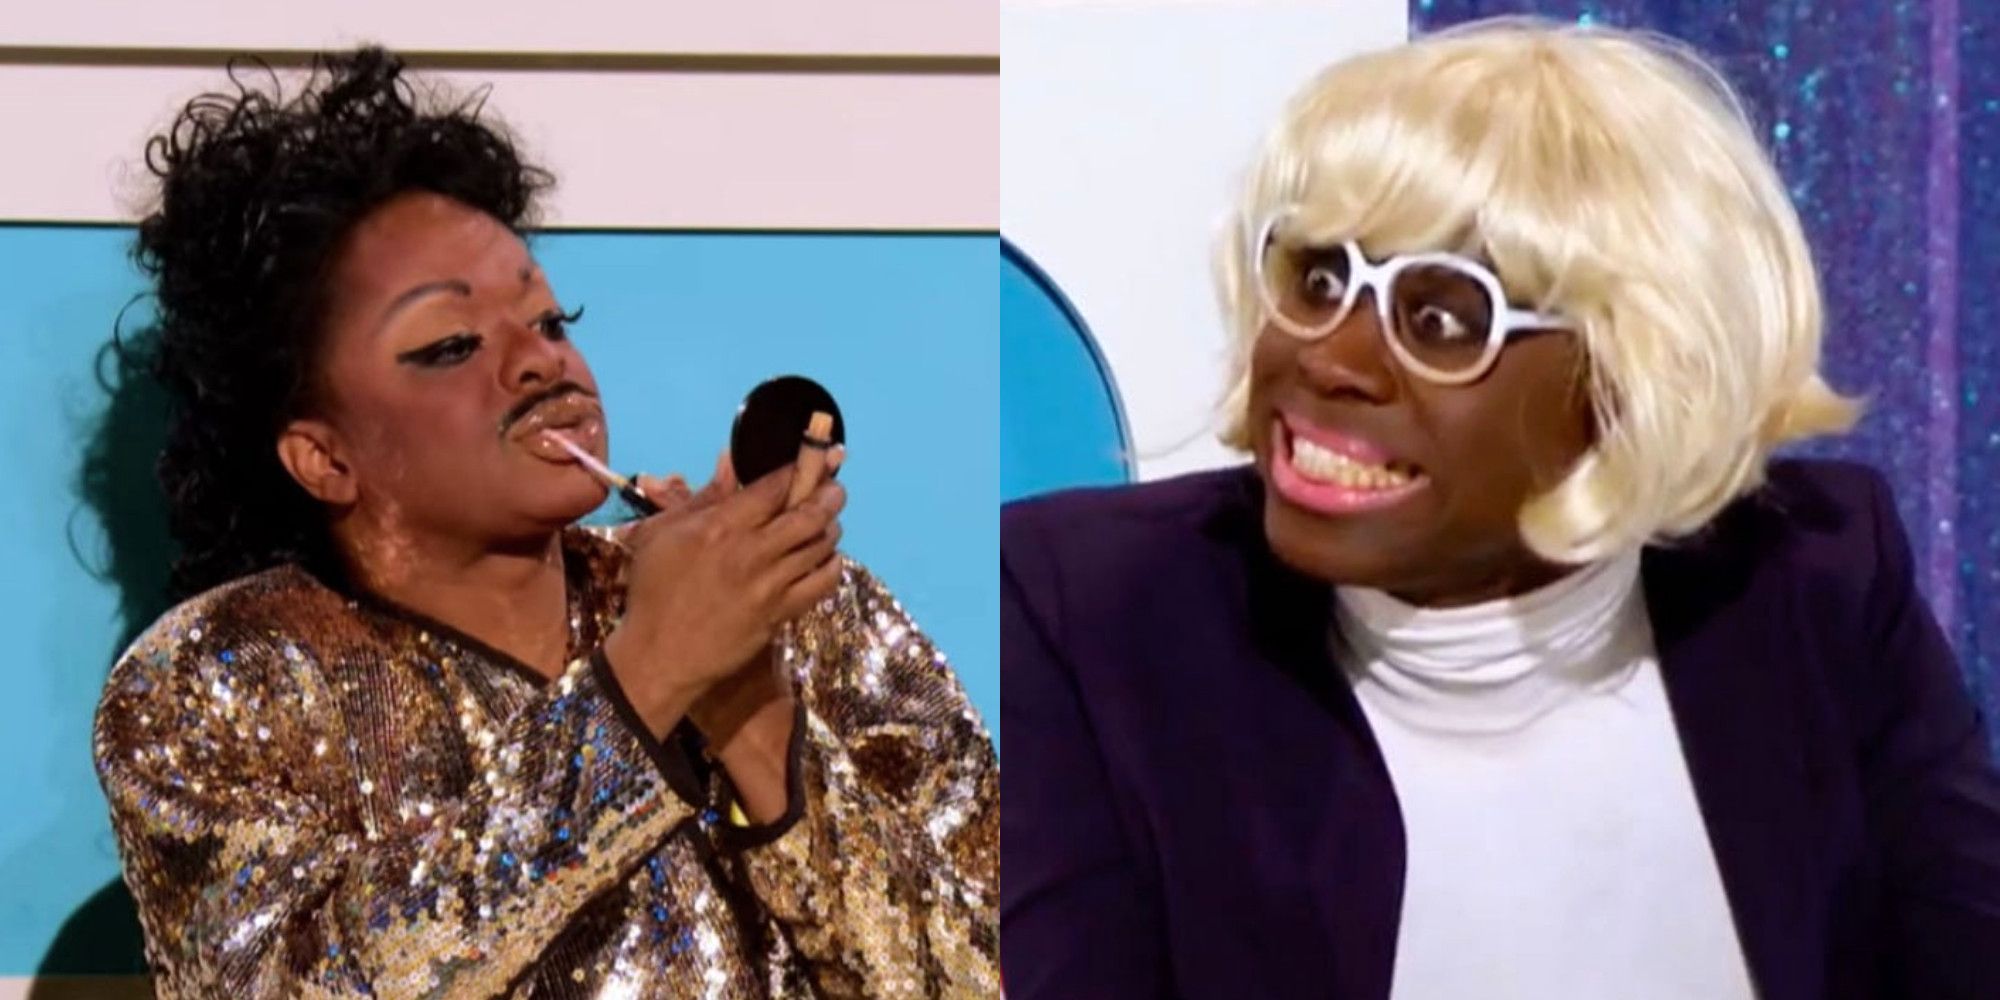 Drag queens Kennedy Davenport and Bob the Drag Queen portray Little Richard and Carol Channing in the Snatch Game on RuPaul's Drag Race